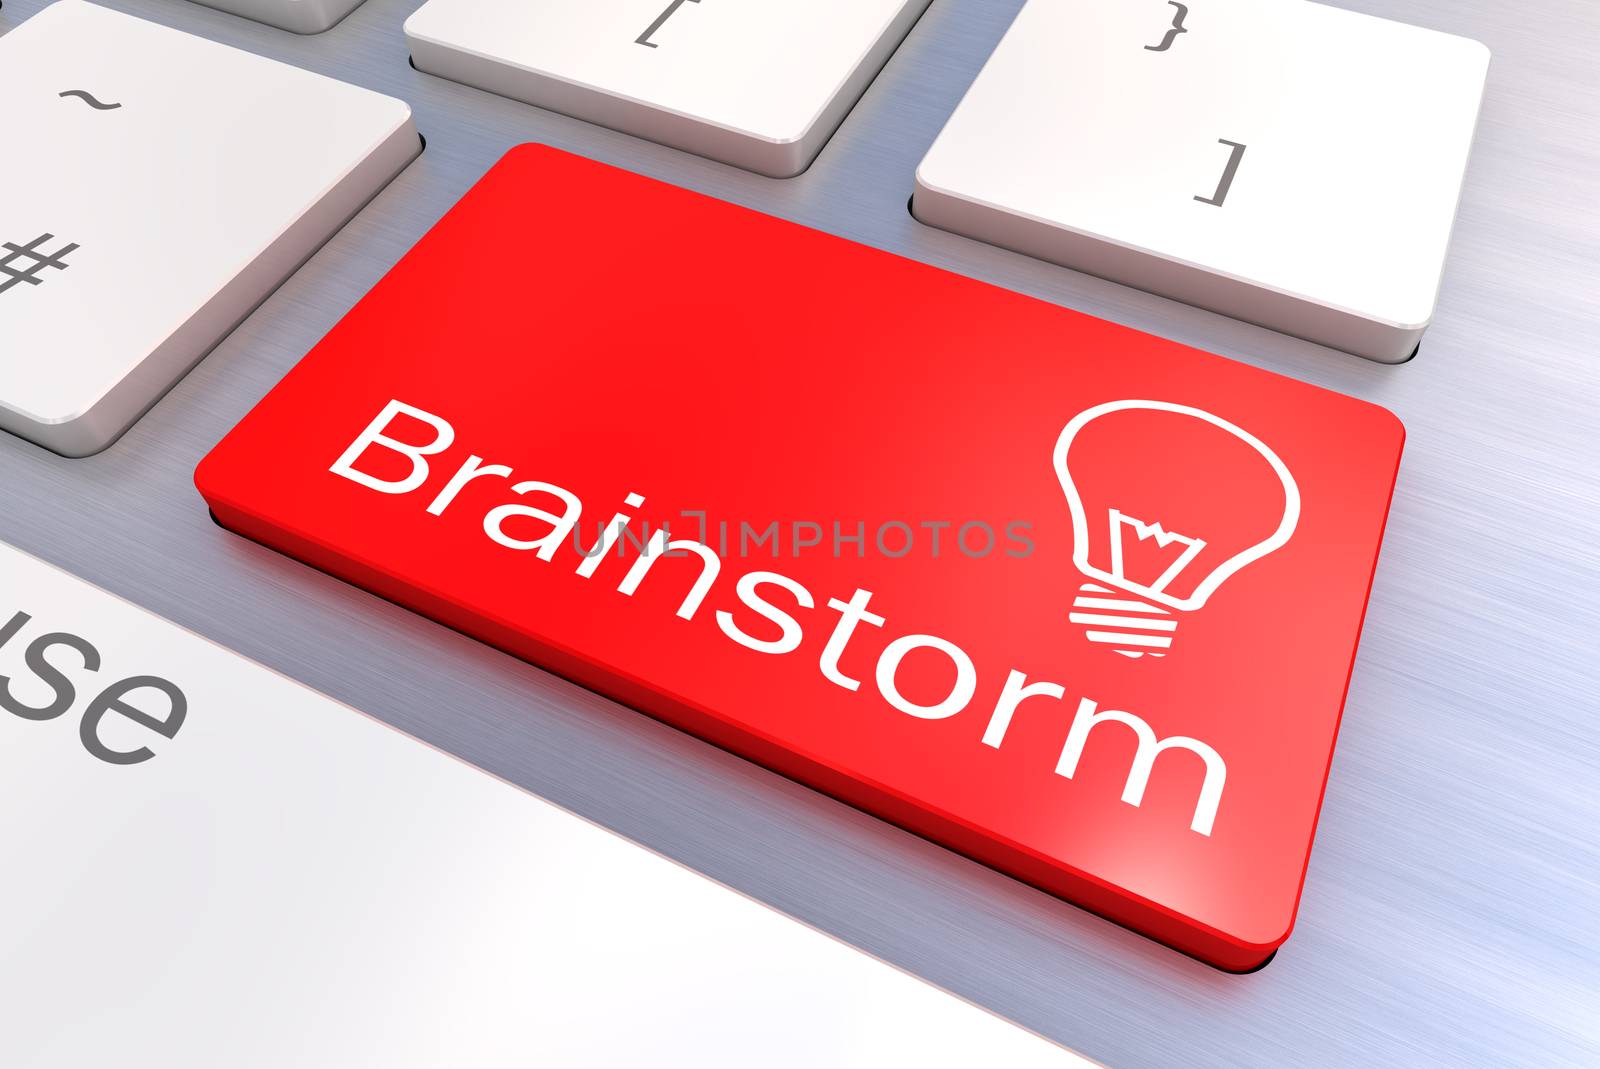 A Colourful 3d Rendered Illustration showing a Brainstorm Concept on a Computer Keyboard